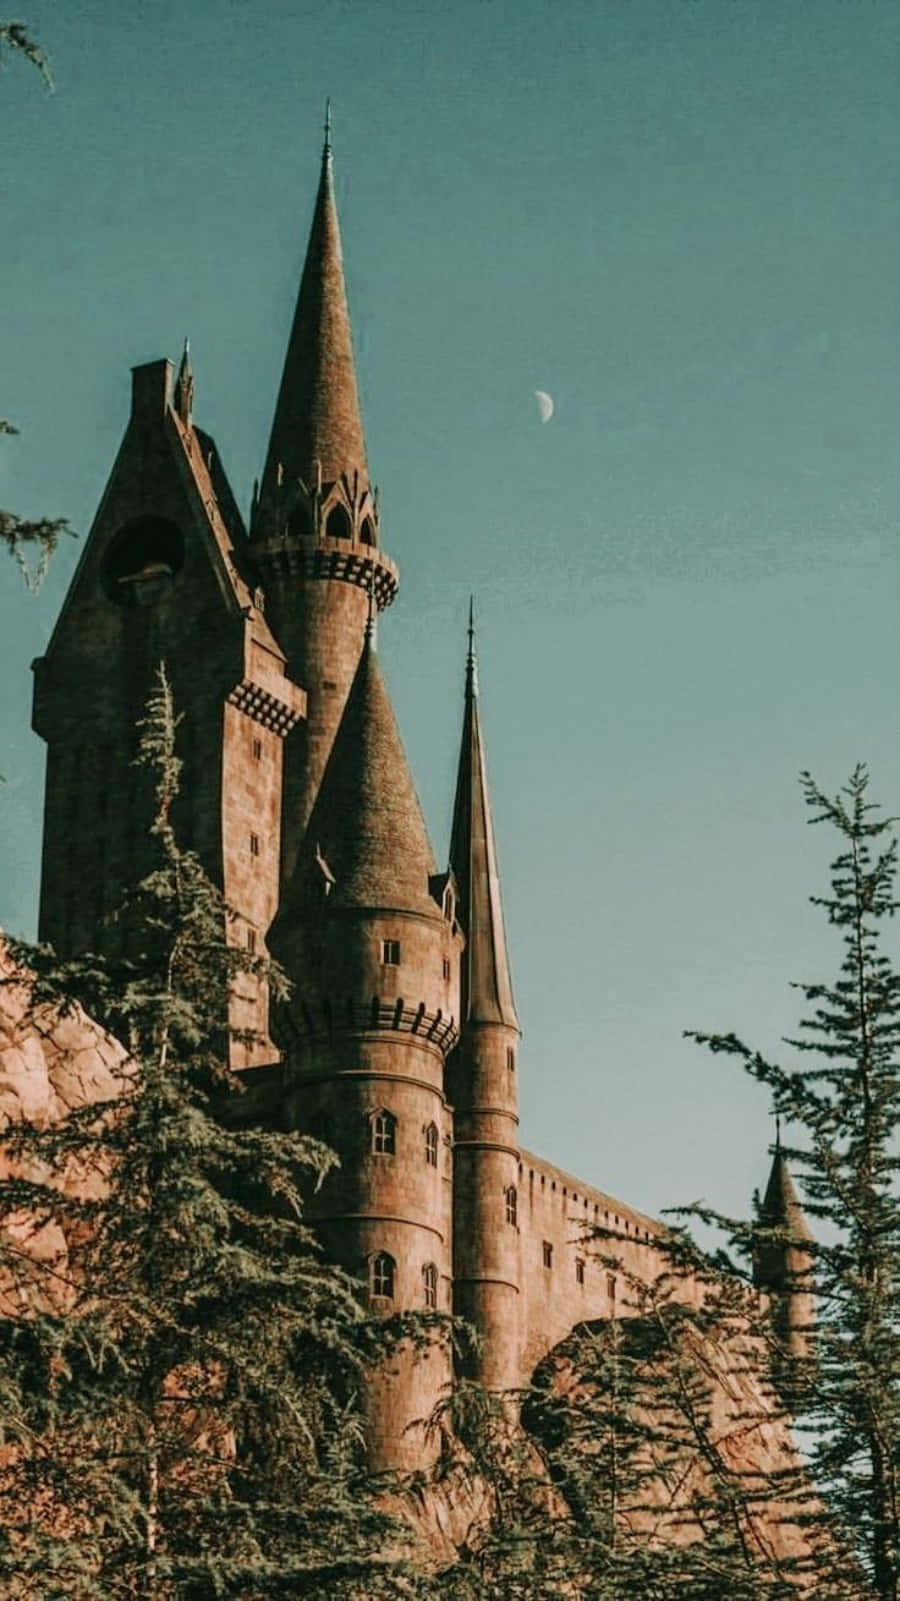 A Dark and Mysterious Aesthetic in the World of Harry Potter